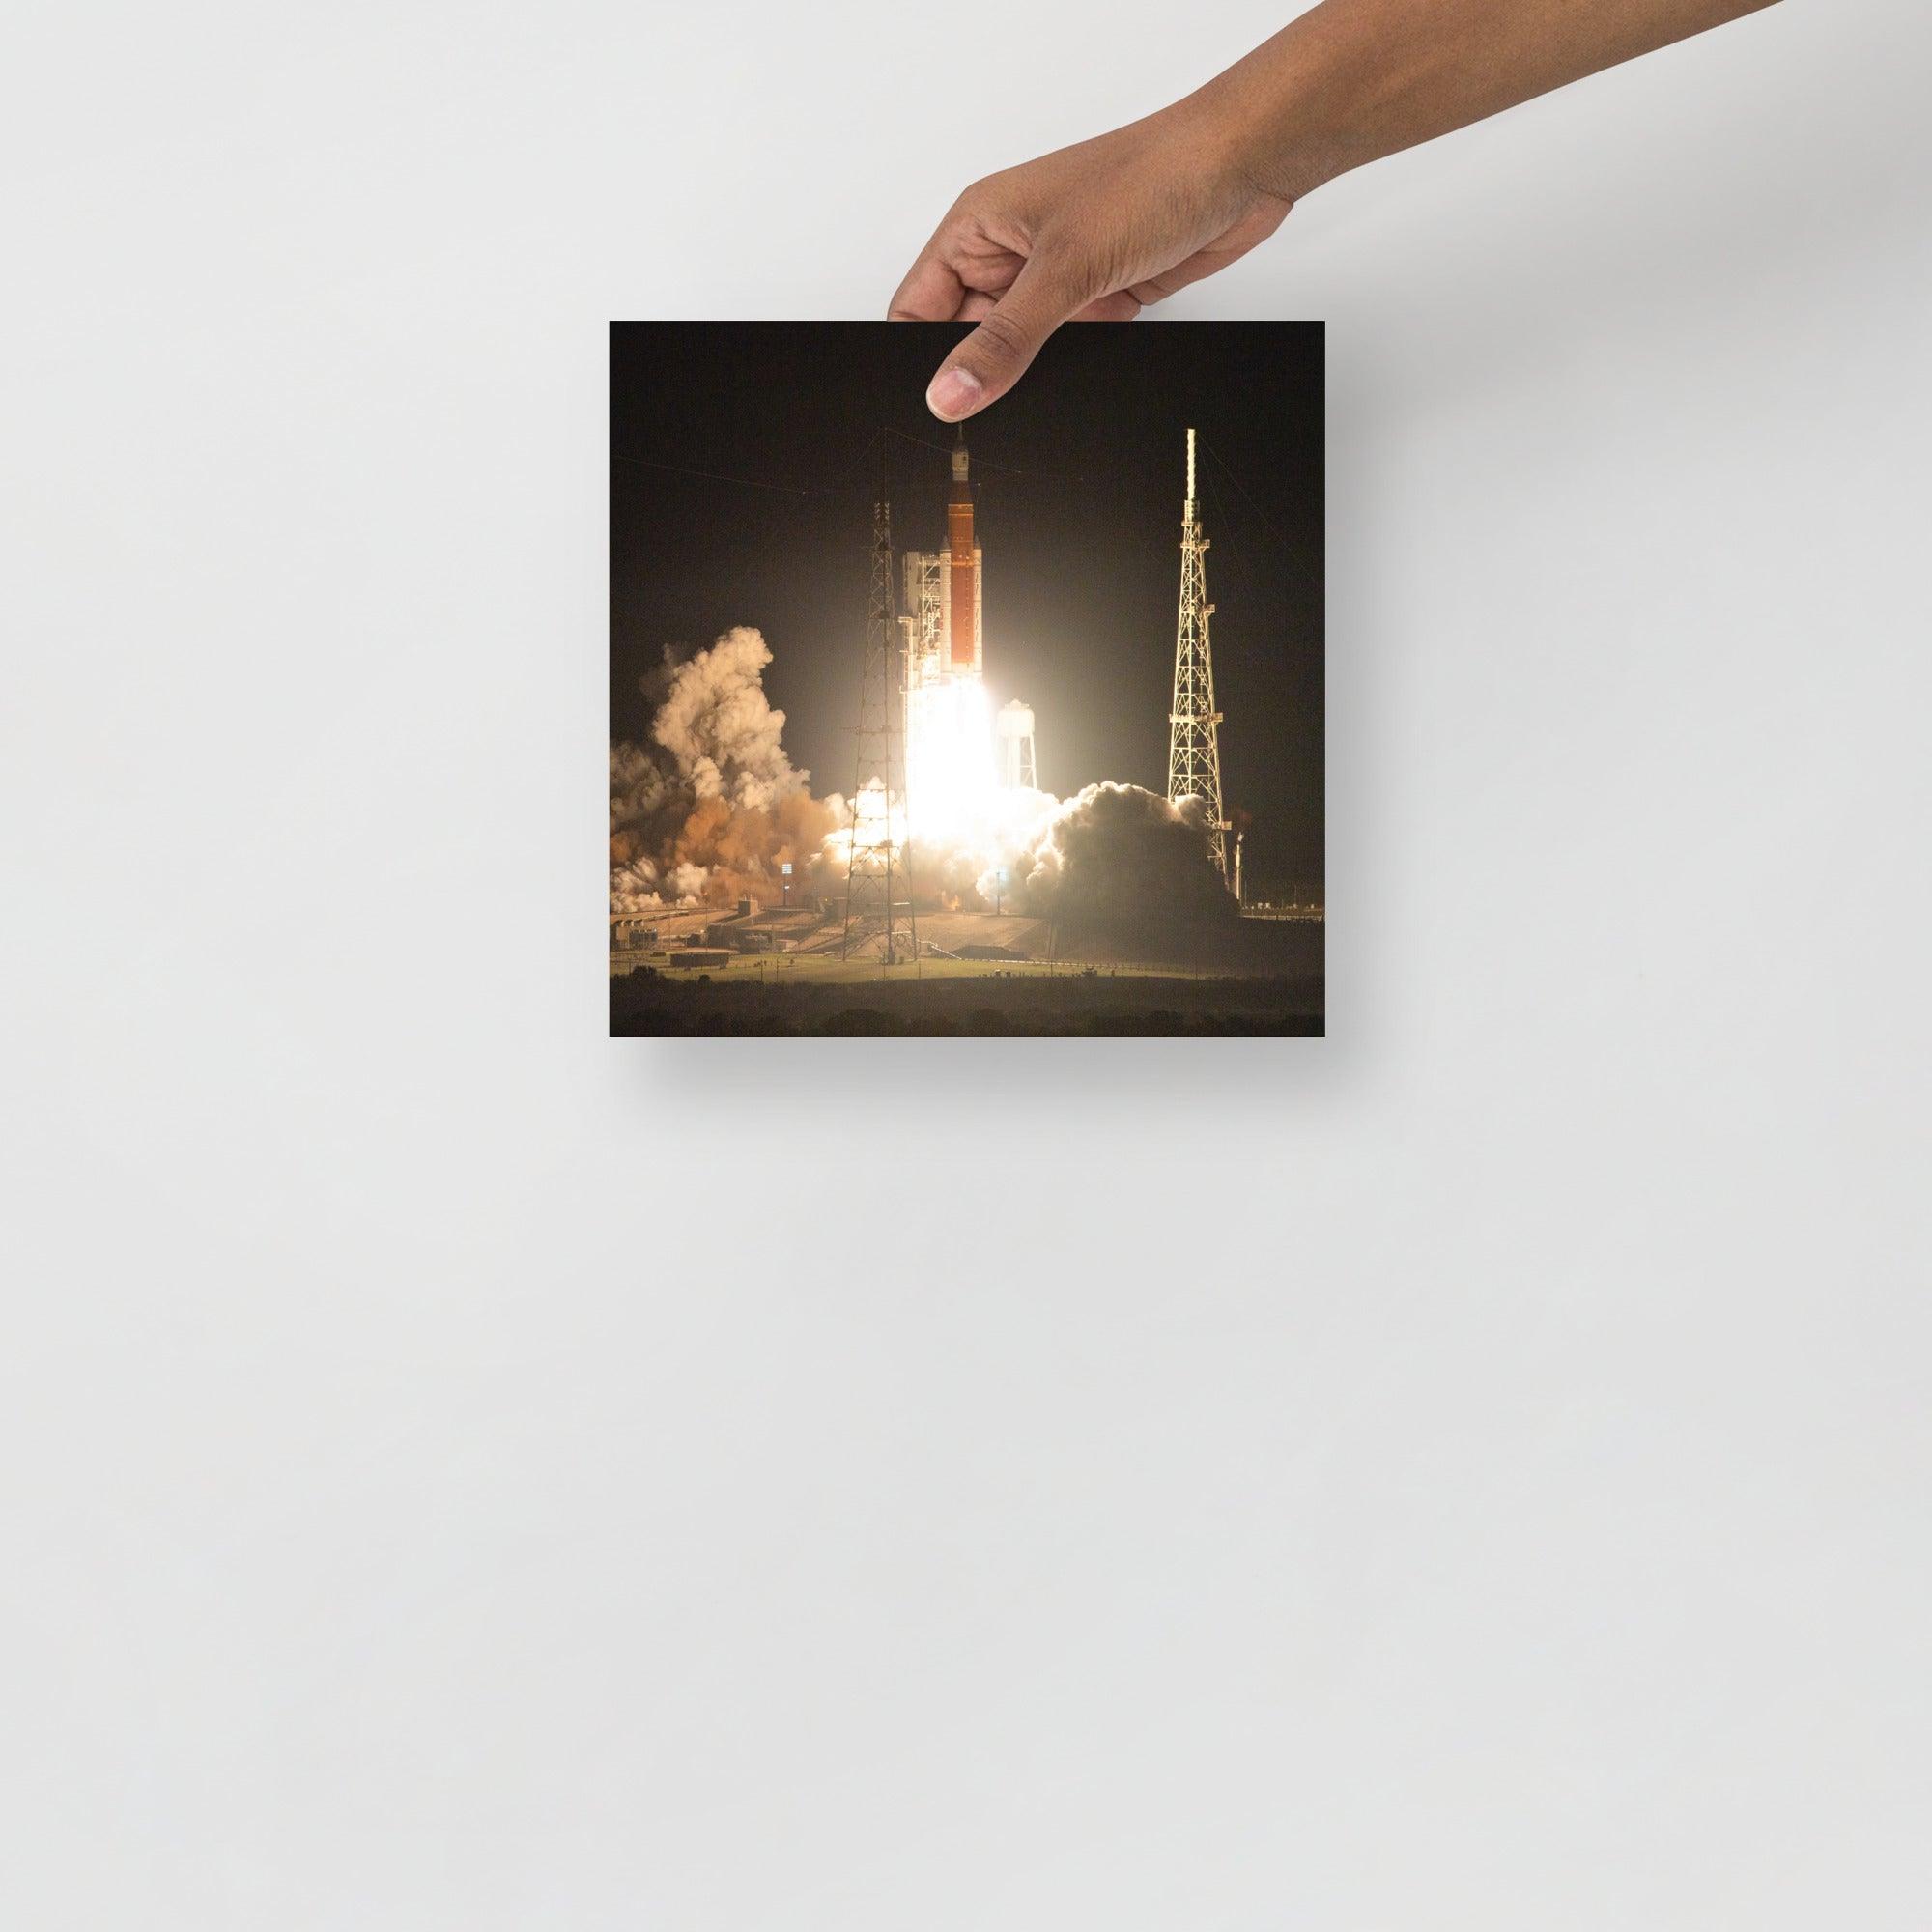 An Artemis 1 poster on a plain backdrop in size 10x10”.